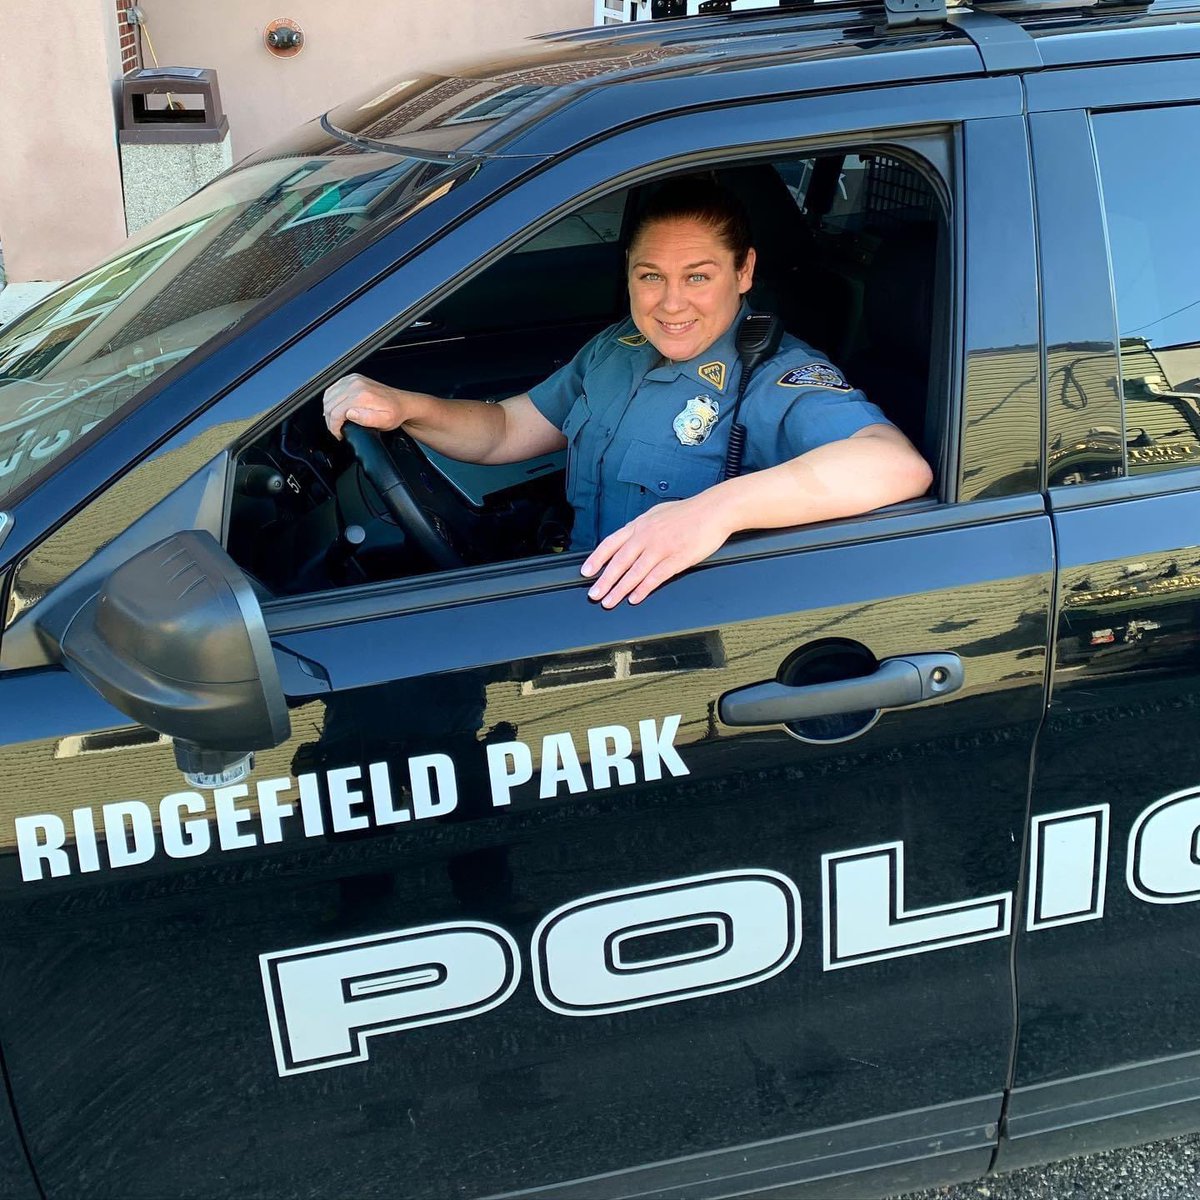 Happy National Police Woman Day to Officer Rellinger & and all of the women on duty today! #nationalpolicewomansday #ridgefieldpark #rppd #police #policewoman  #newjersey #bergencounty